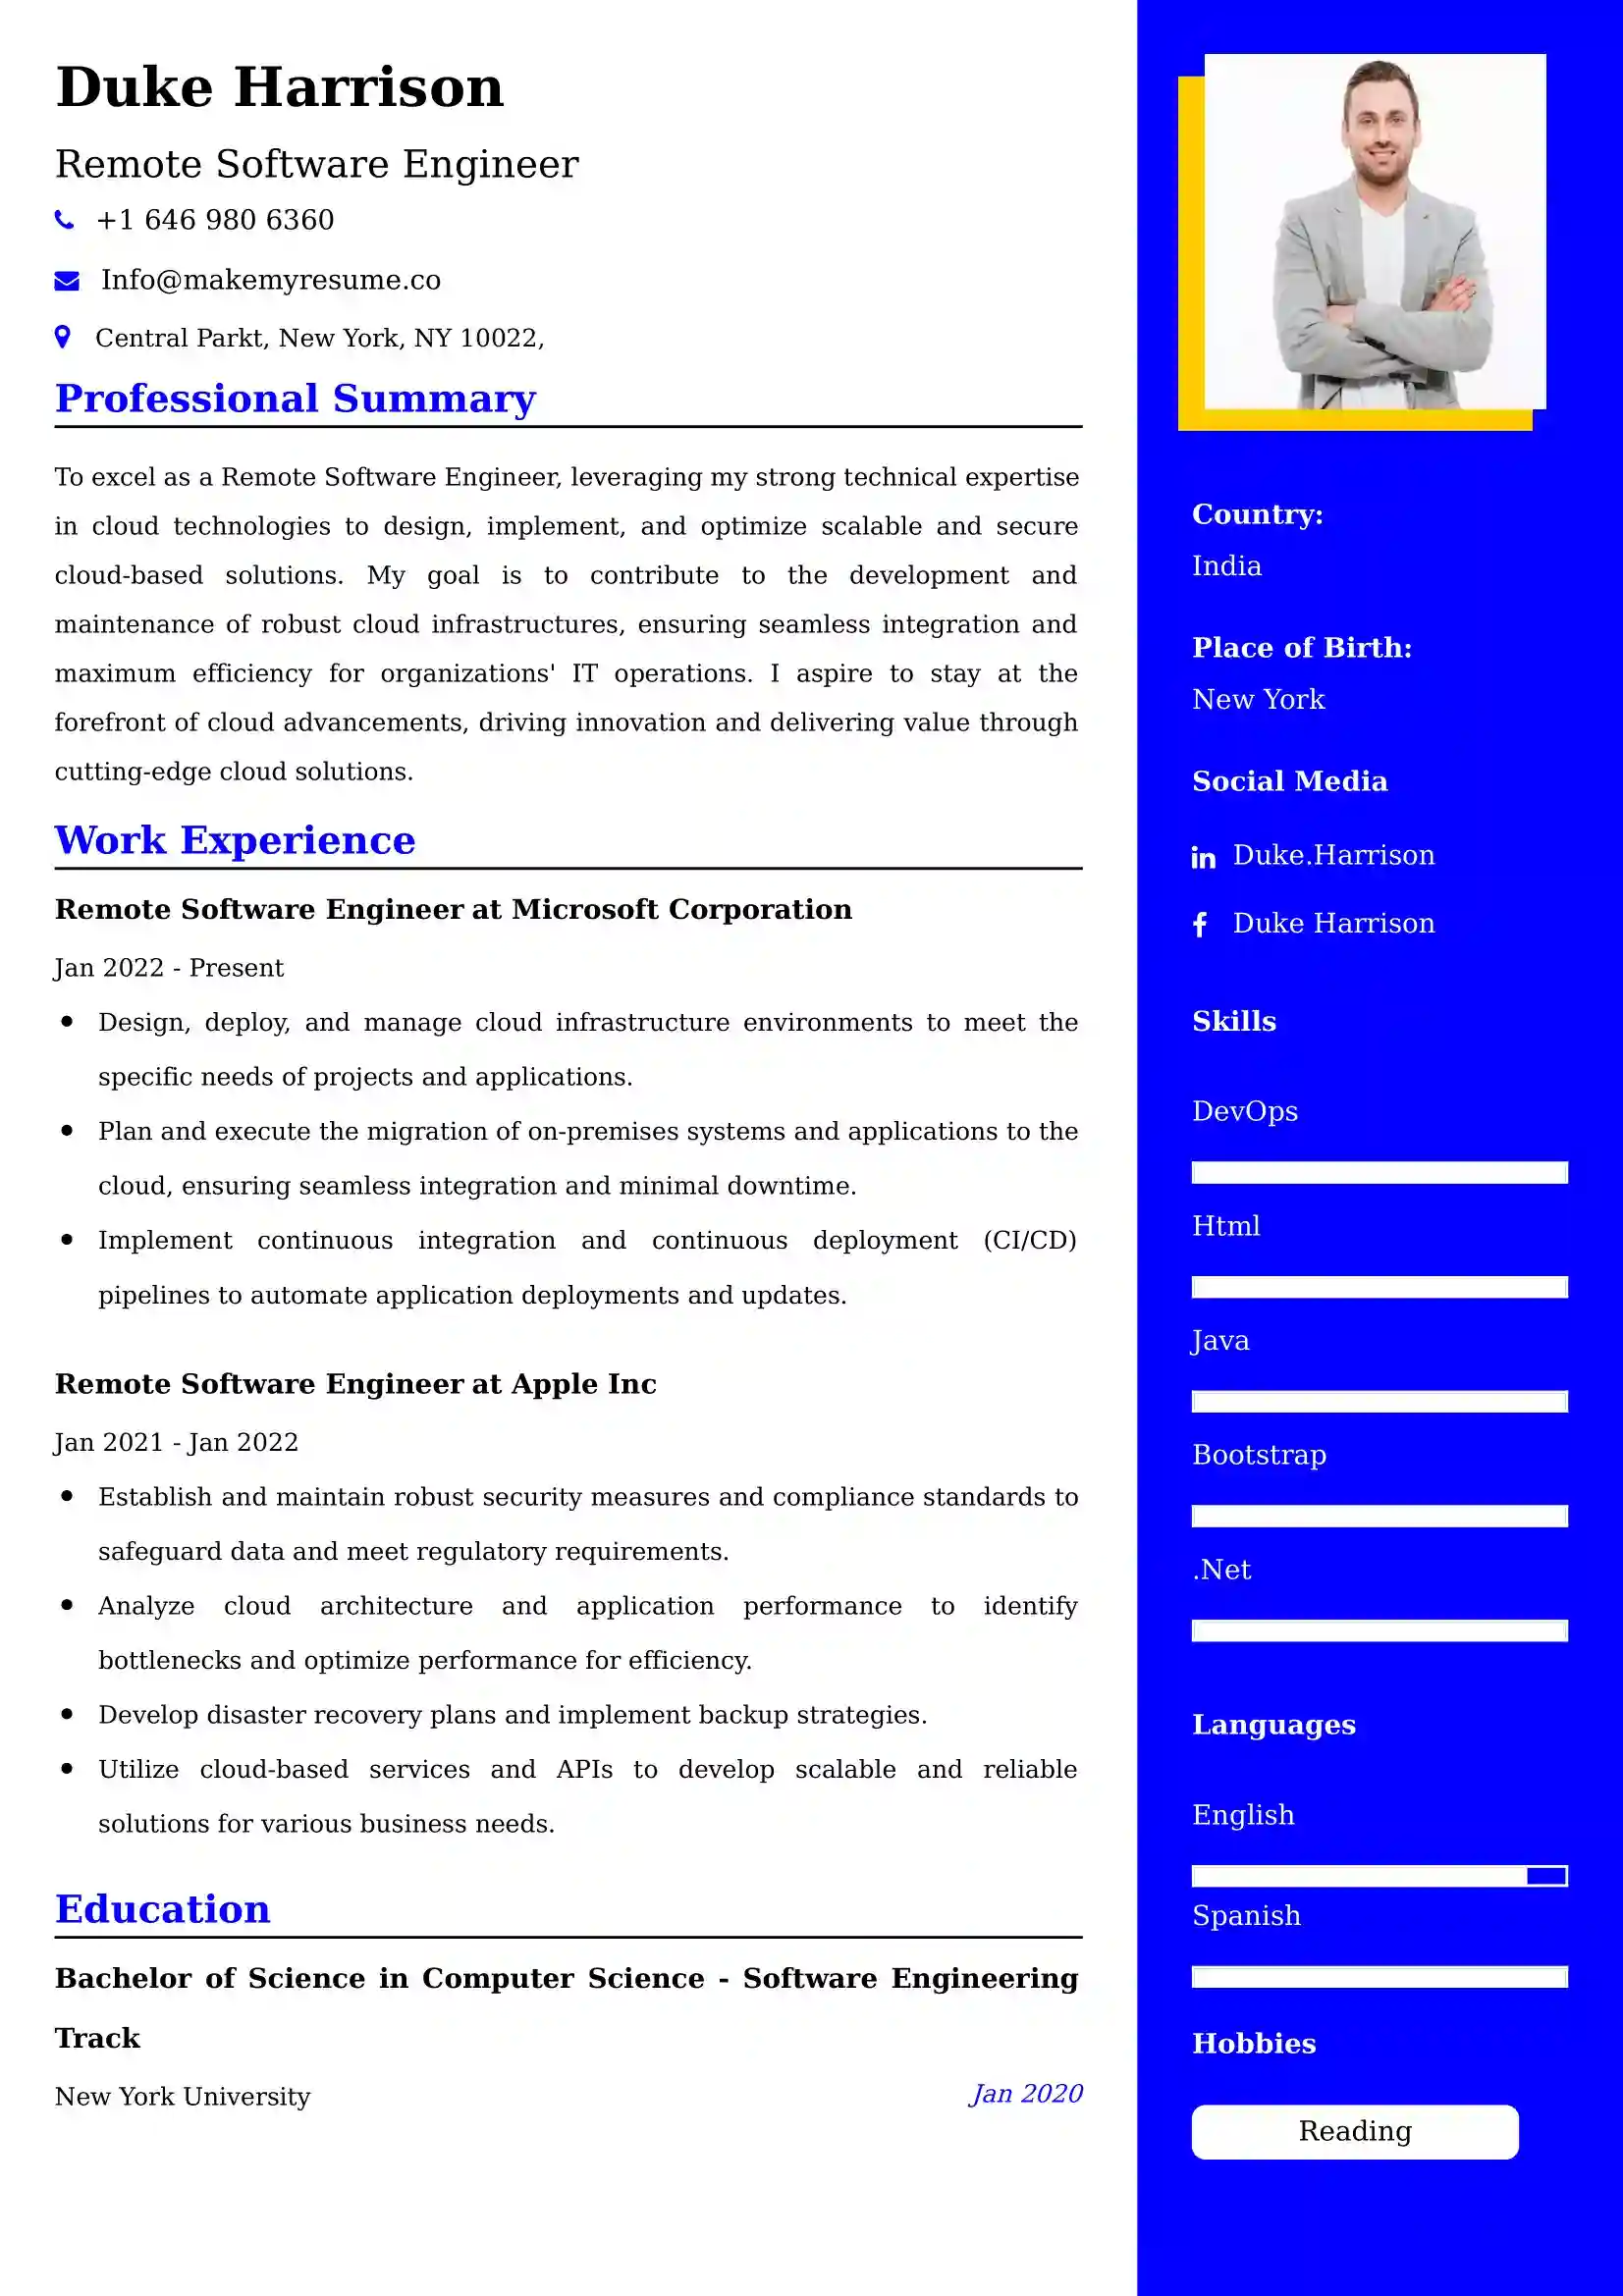 Remote Software Engineer Resume Examples - UAE Format and Tips.